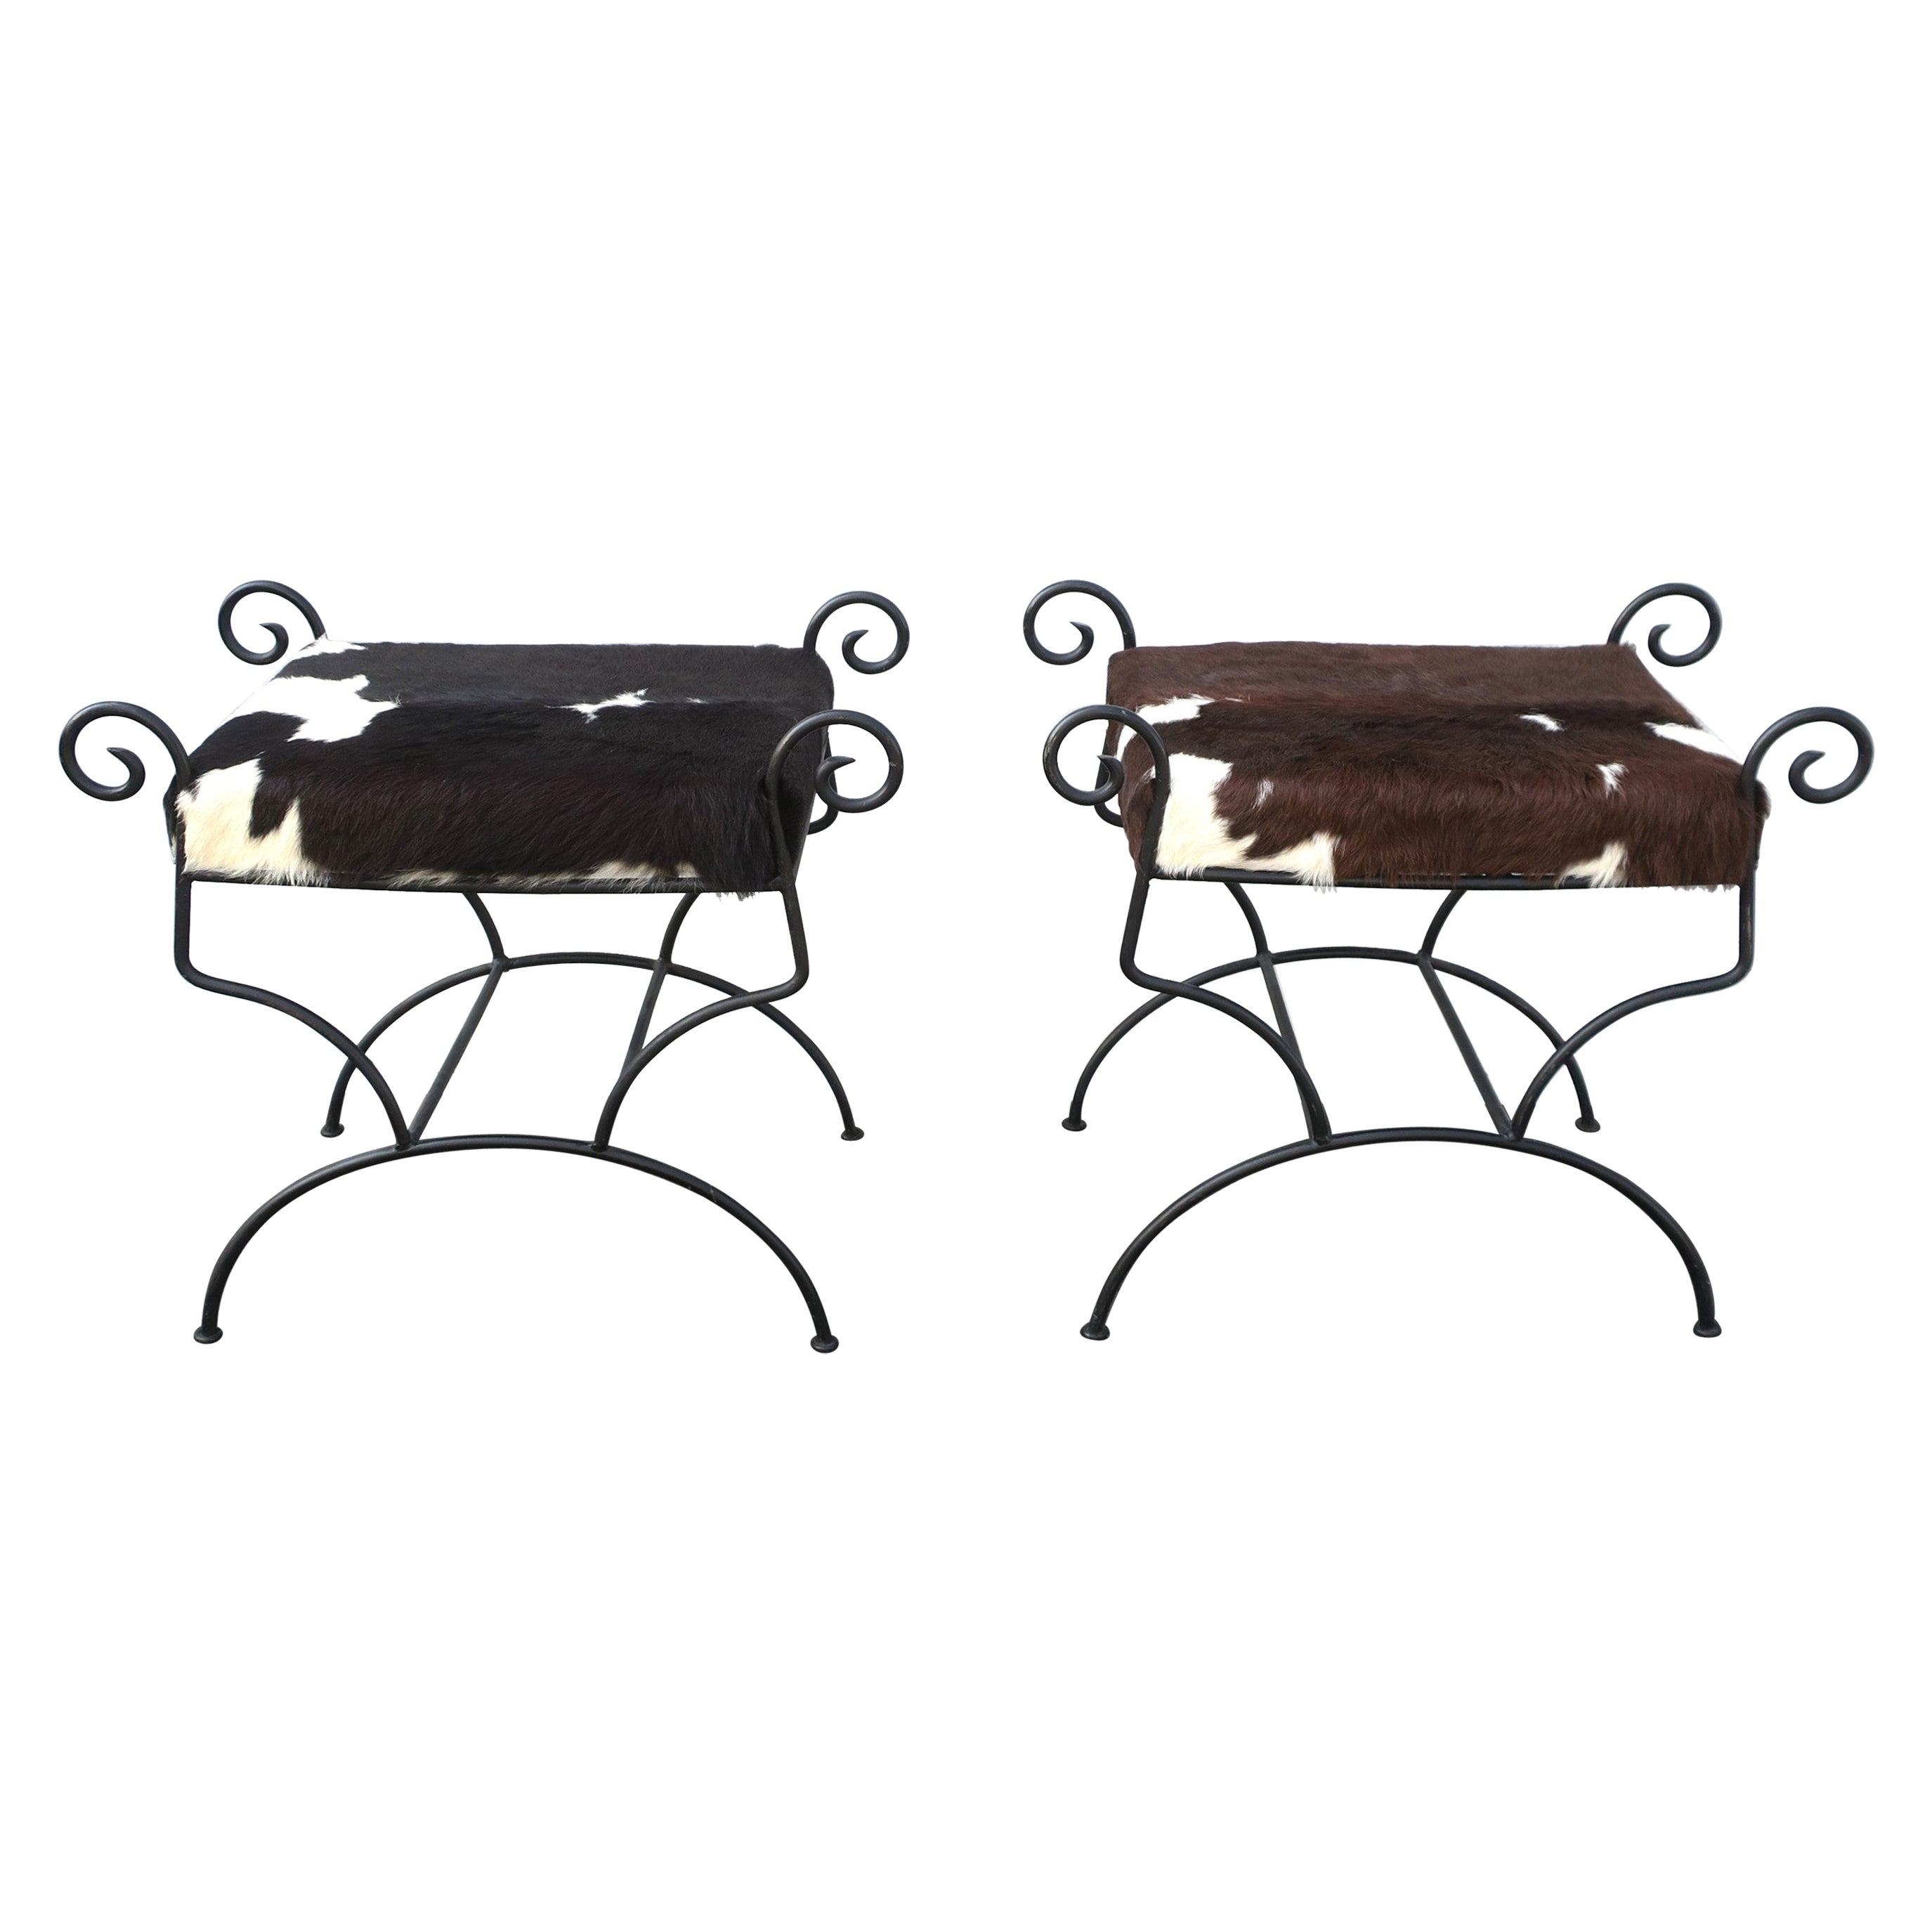 Retro Black Wrought Iron and Hide Benches or Stools, Pair